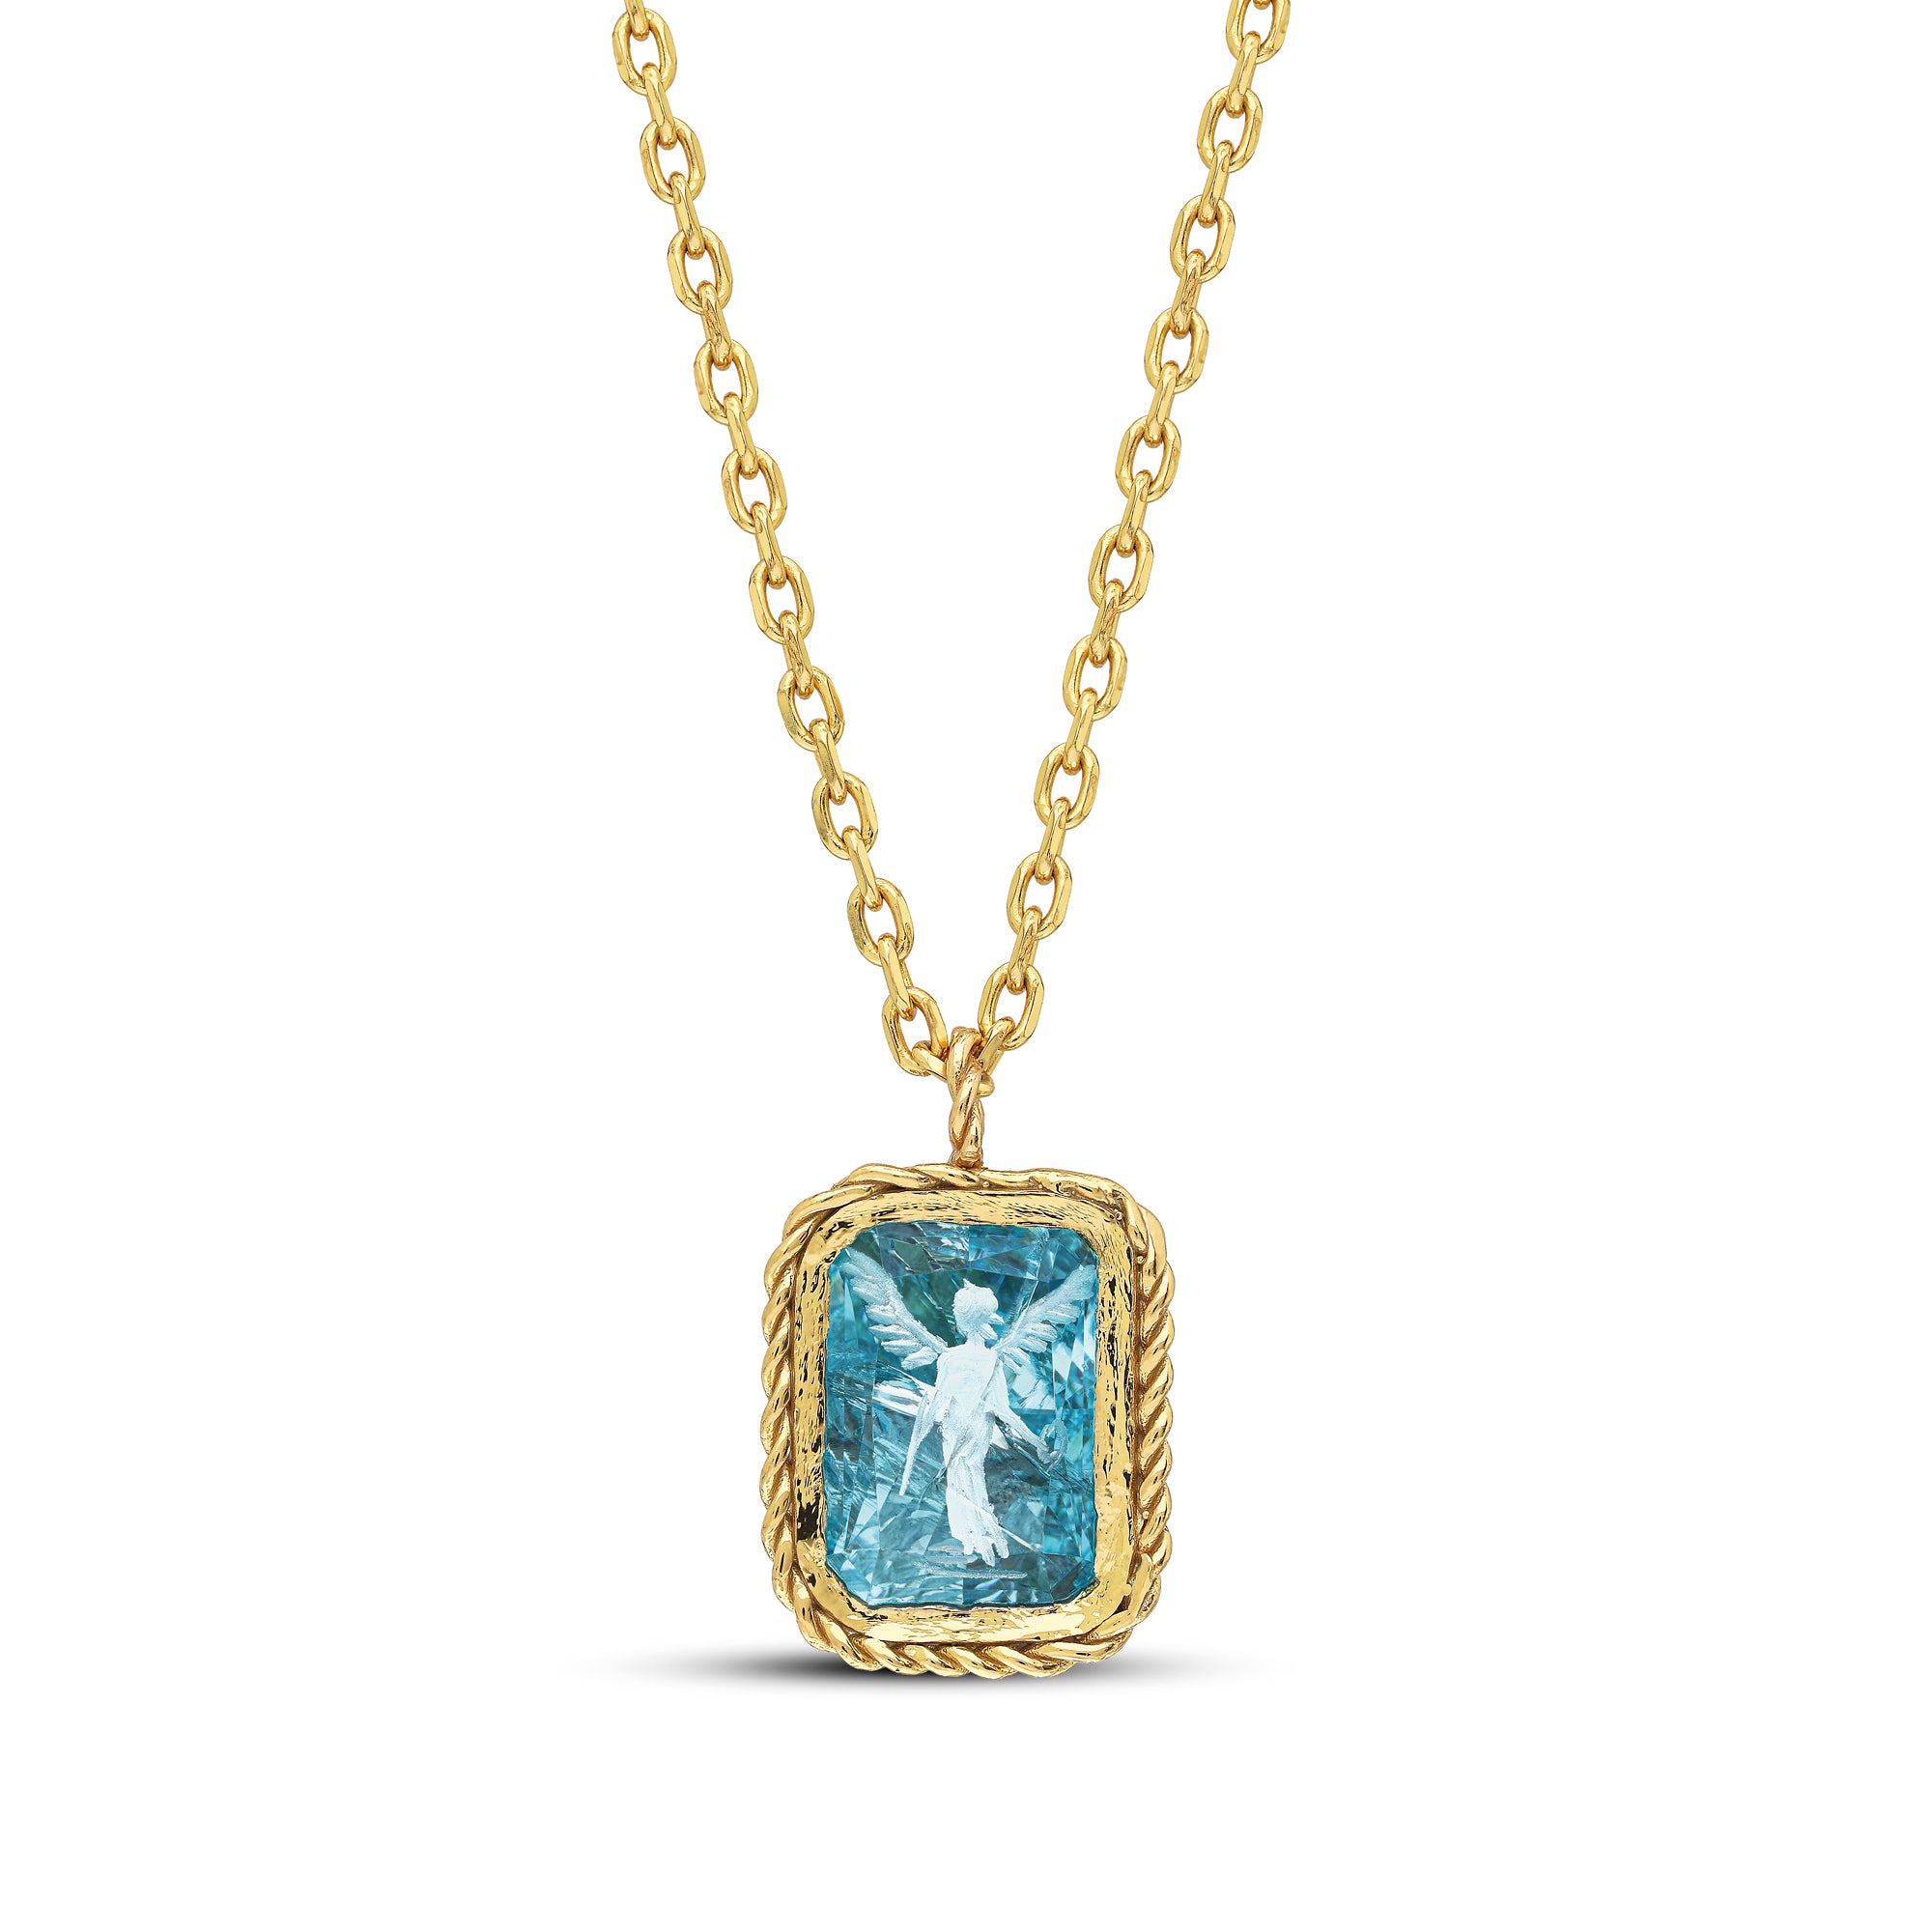 THE BLUE ANGEL NECKLACE